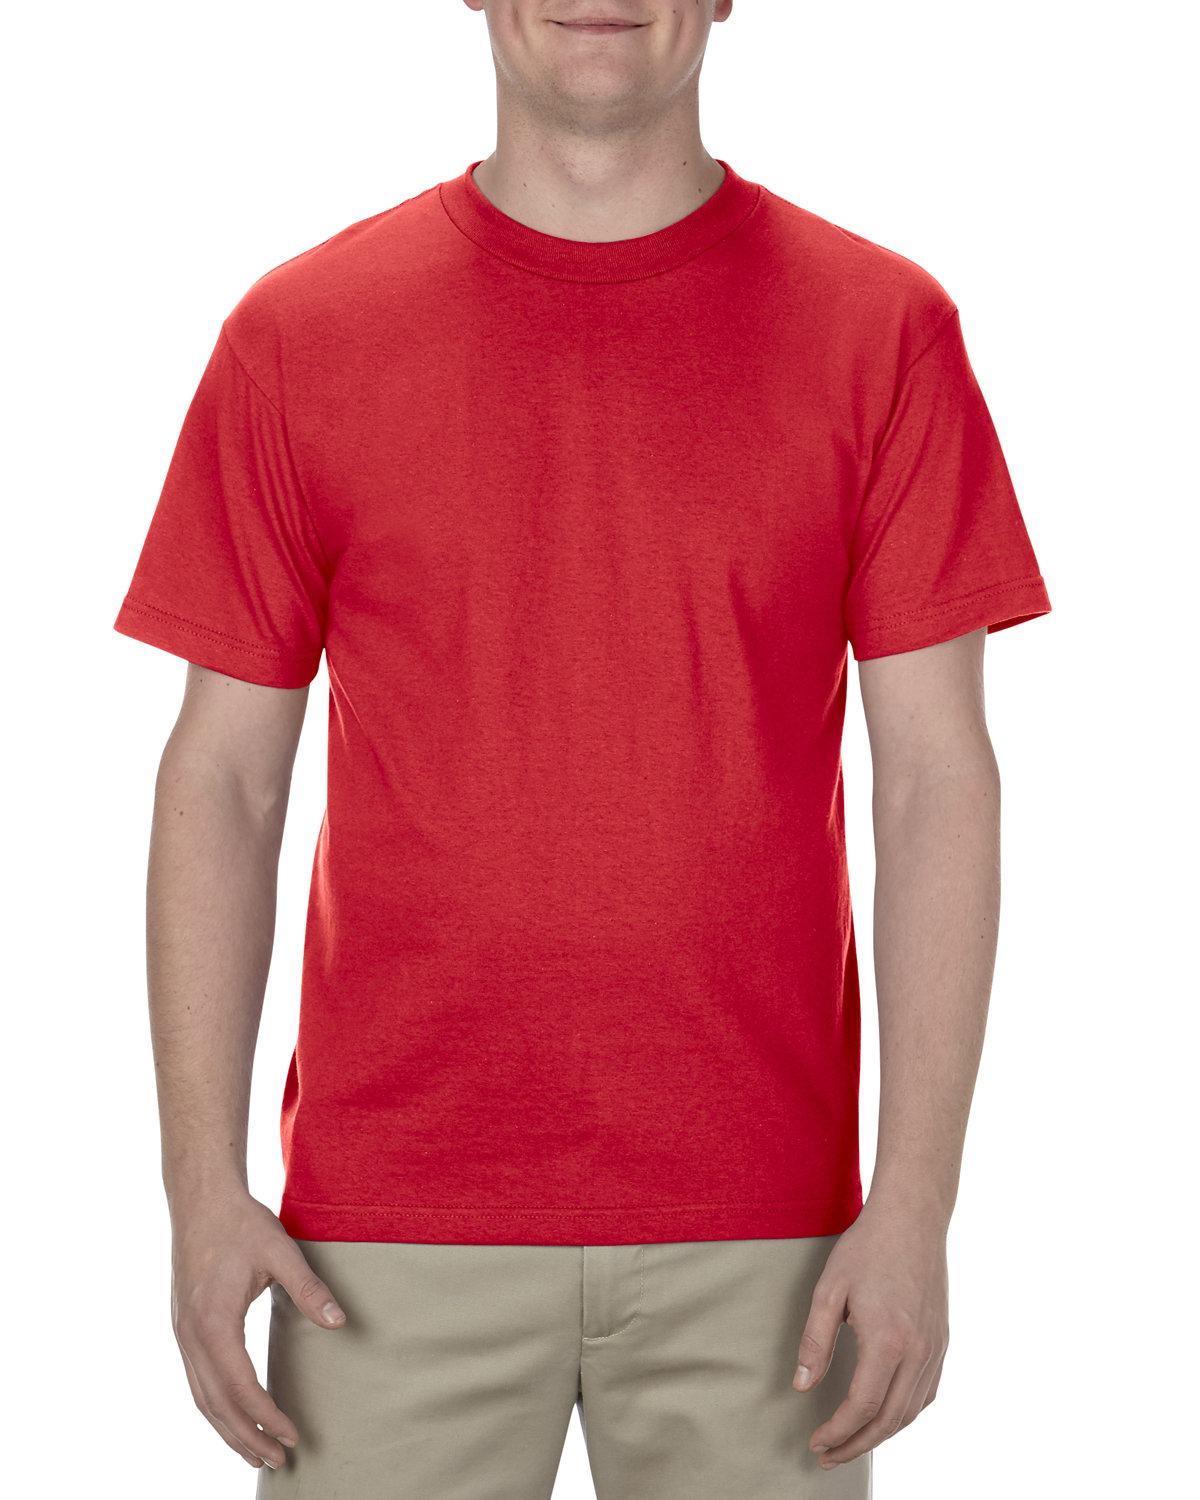 Alstyle Adult 6.0 oz., 100% Cotton T-Shirt RED 